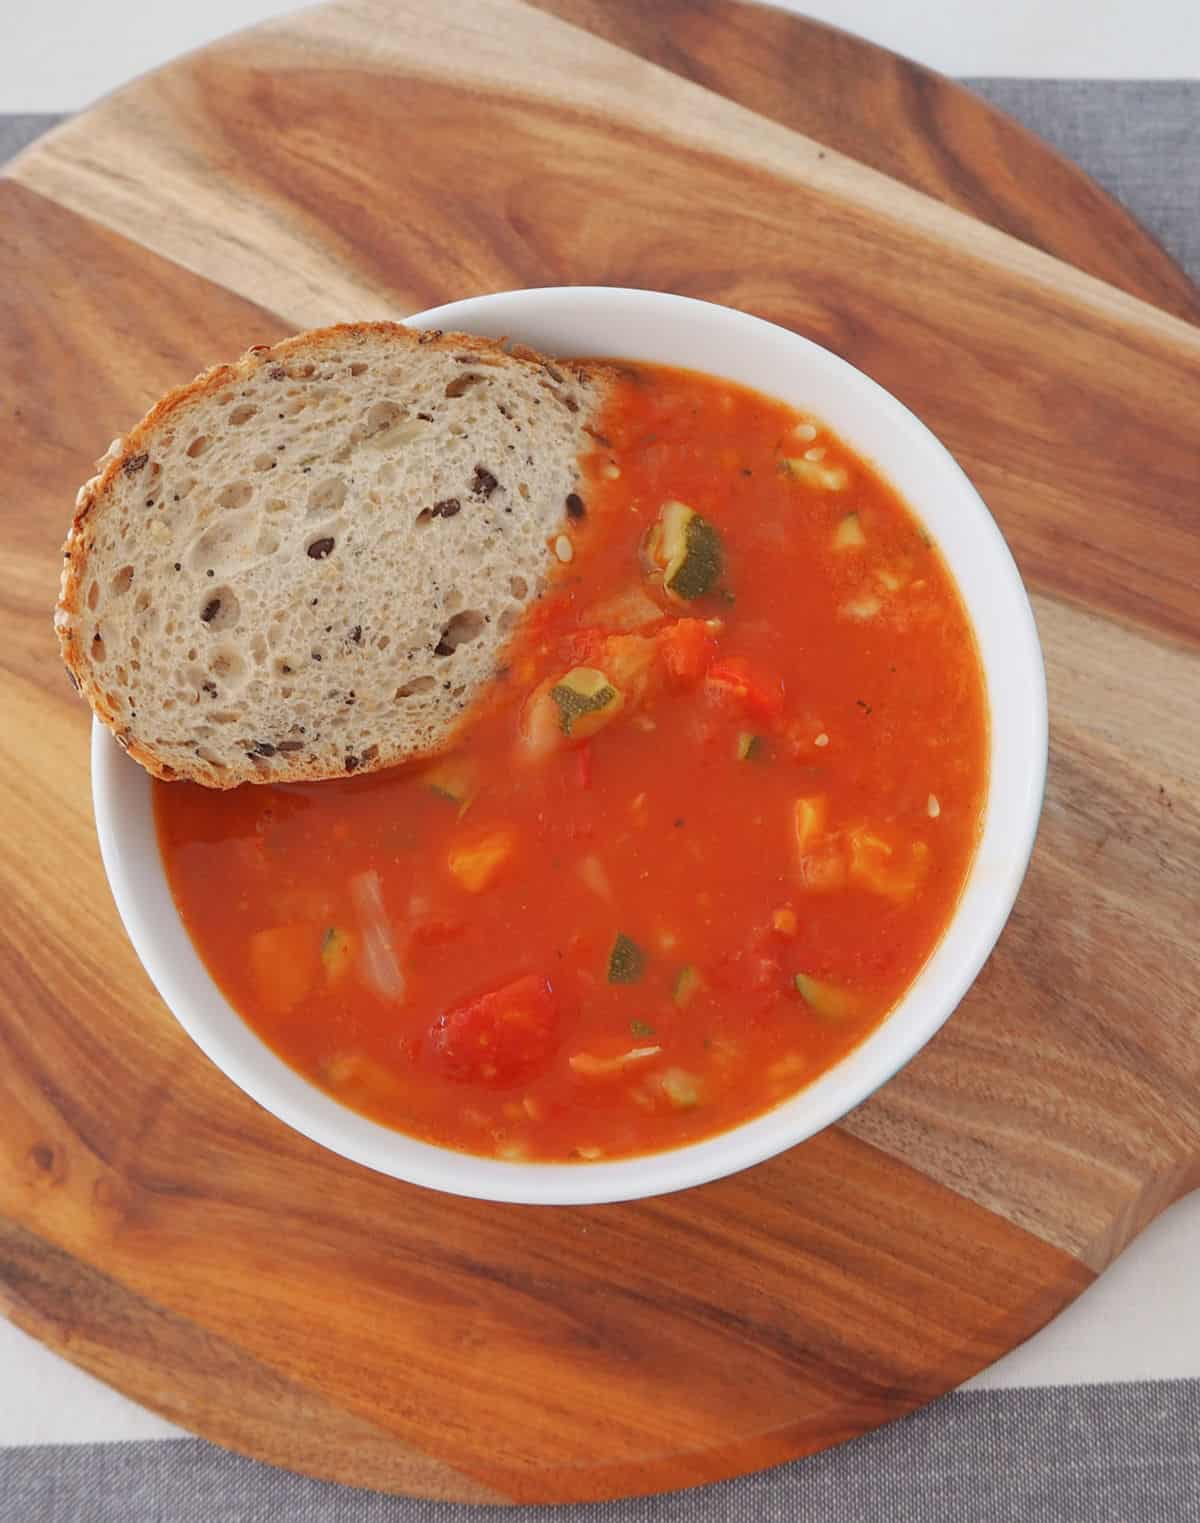 Bowl of vegetable soup with a piece of multigrain bread in it. Bowl is sitting on a wooden board.